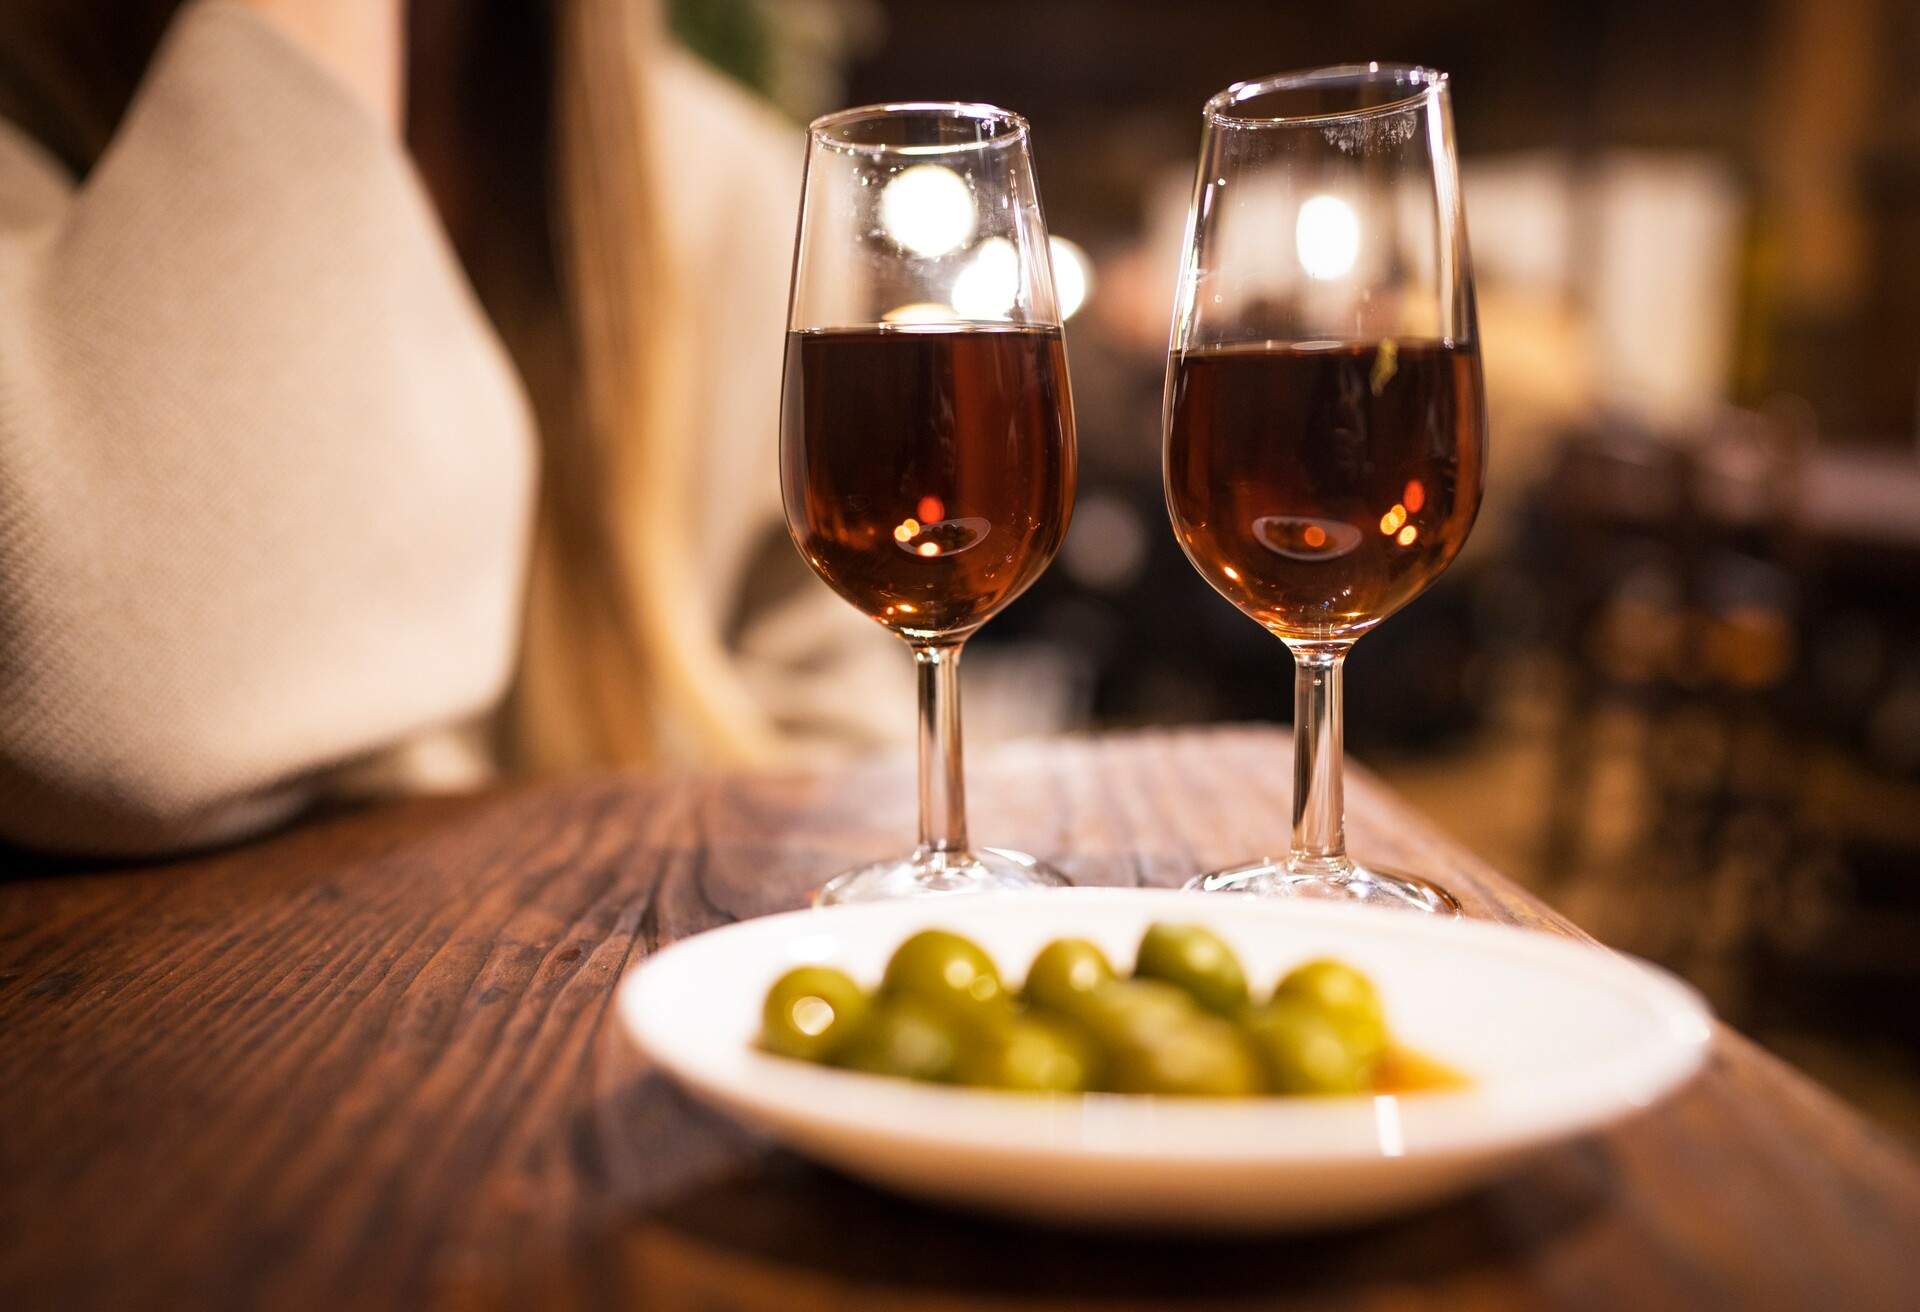 An exquisite serving of vermouth accompanied by delectable olive tapas is presented for two at a rustic and classic wine bar.